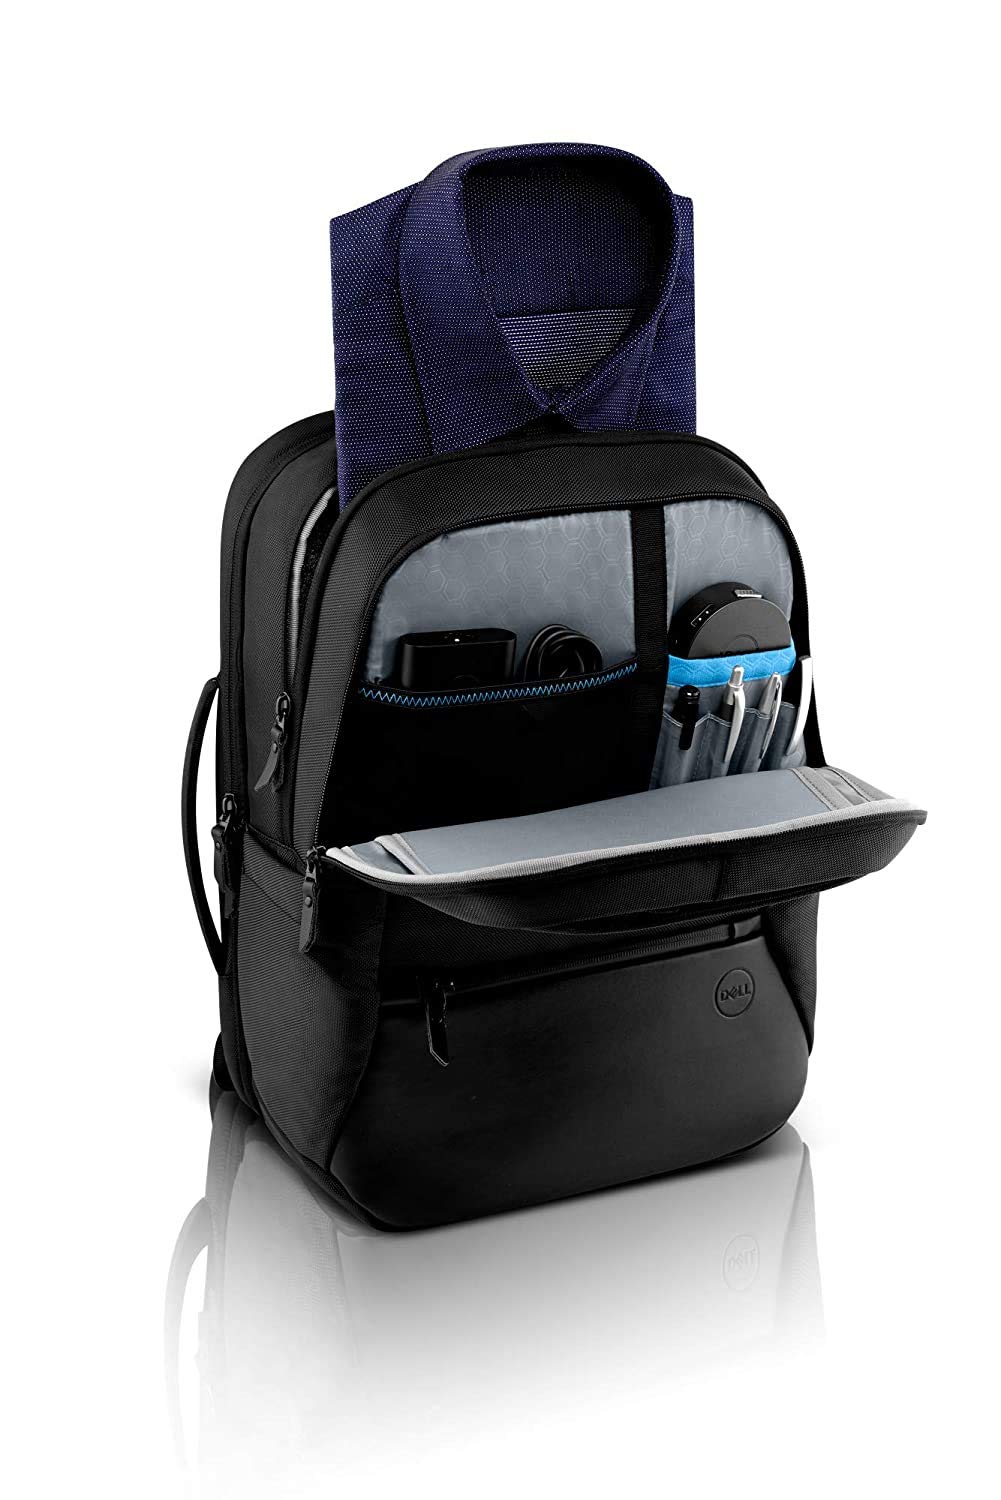 Dell Premier Backpack 15 – PE1520P – Fits most laptops up to 15 ...